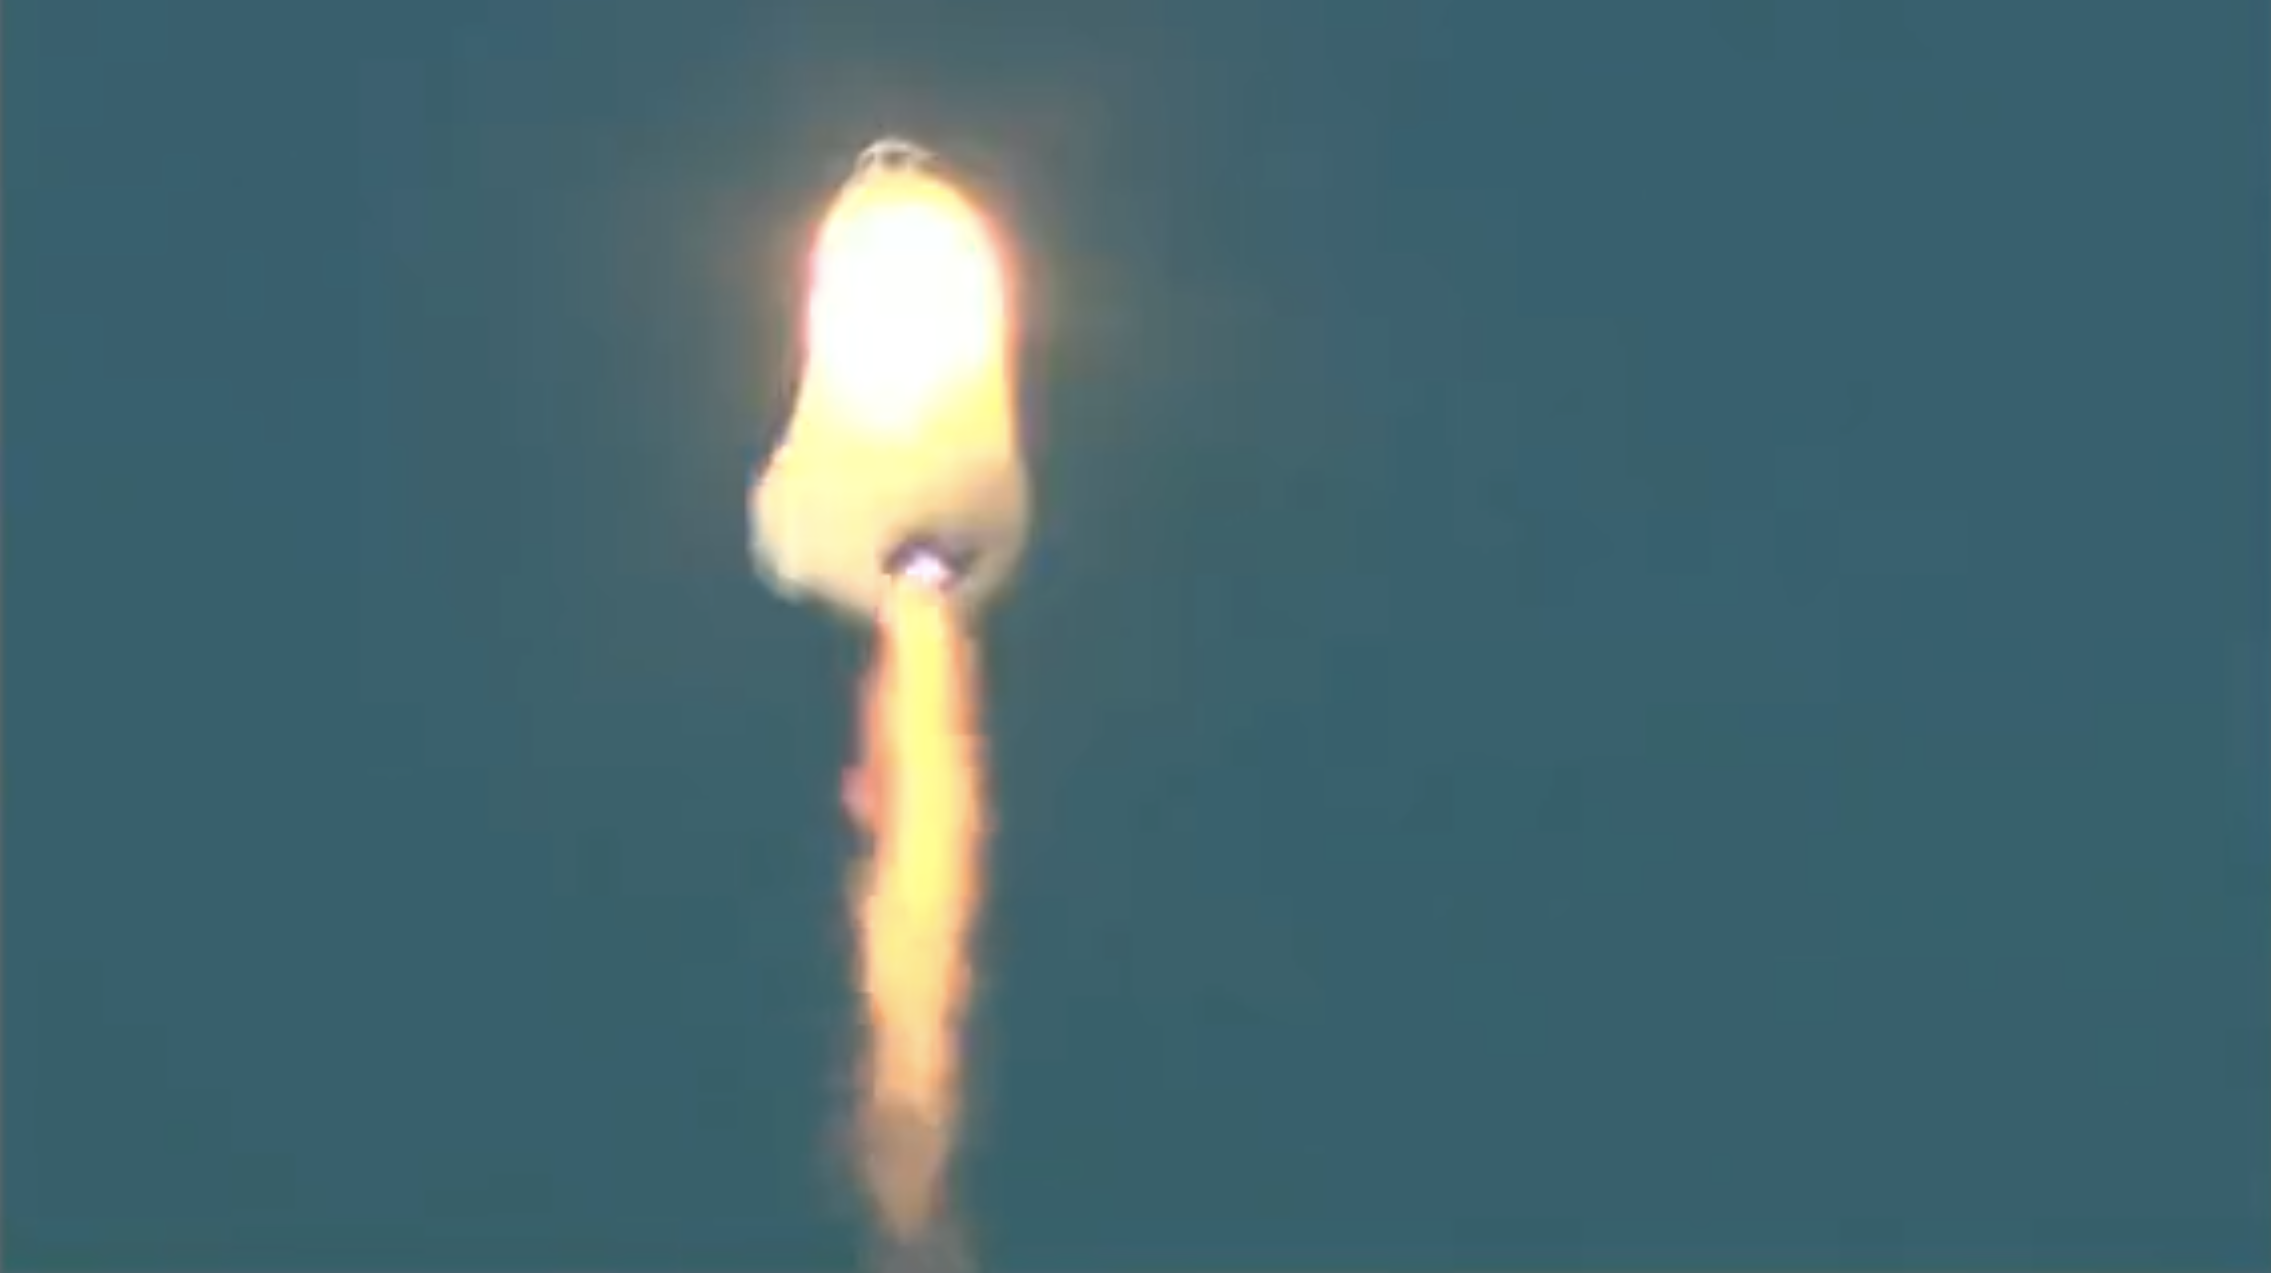 The New Shepard rocket appeared to be completely enveloped in flame, prior to the capsule ejecting from the launch vehicle. (Screenshot: Blue Origin)